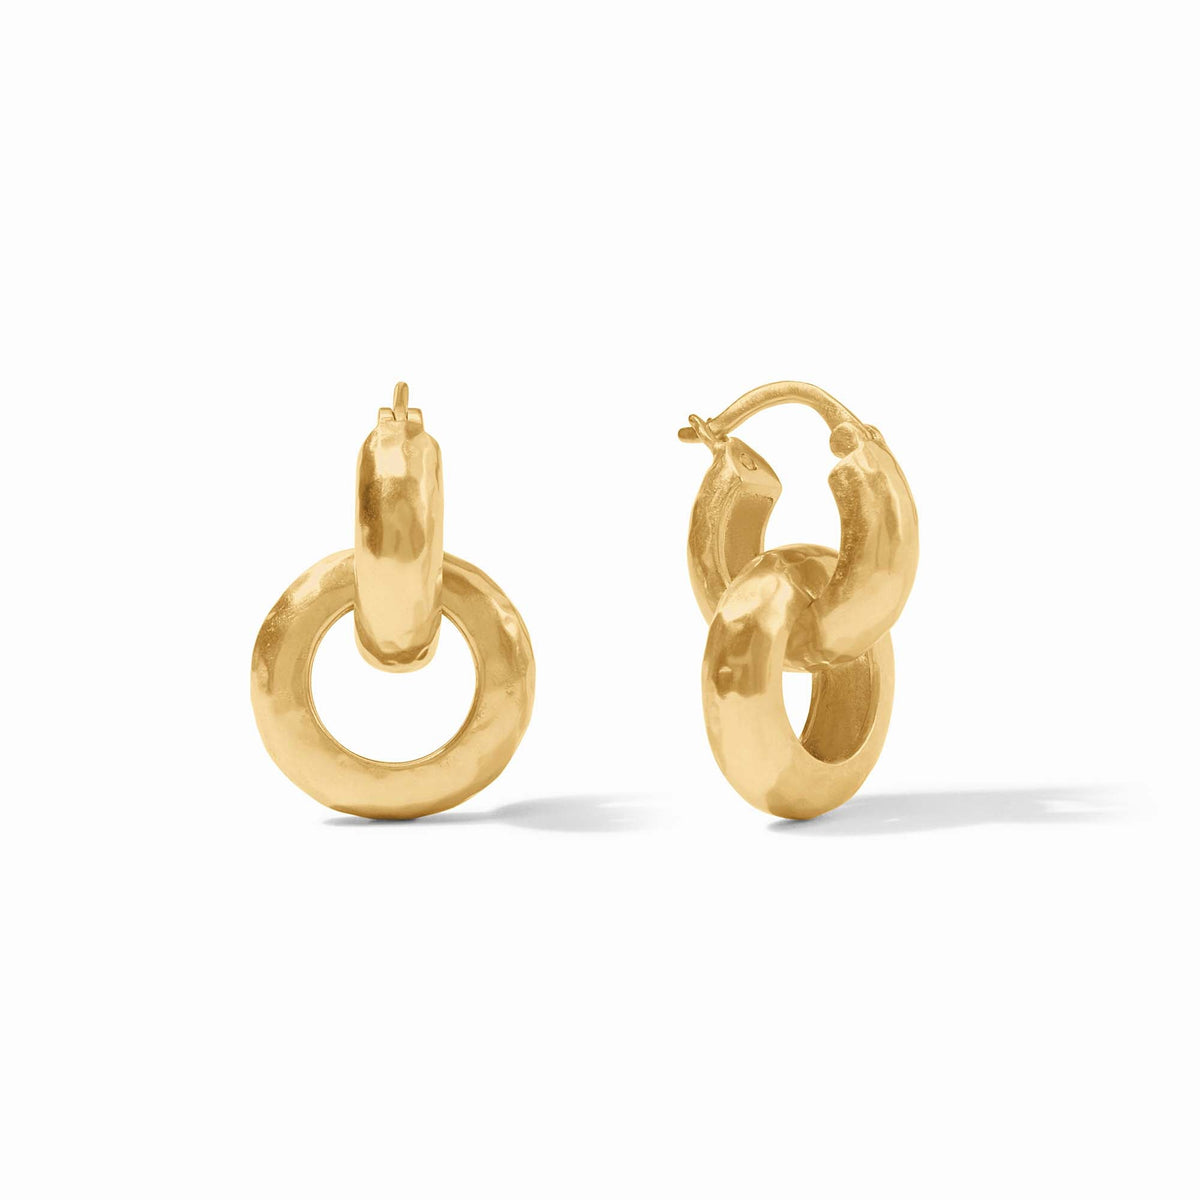 Julie Vos - Catalina 2-in-1 Earring, Gold